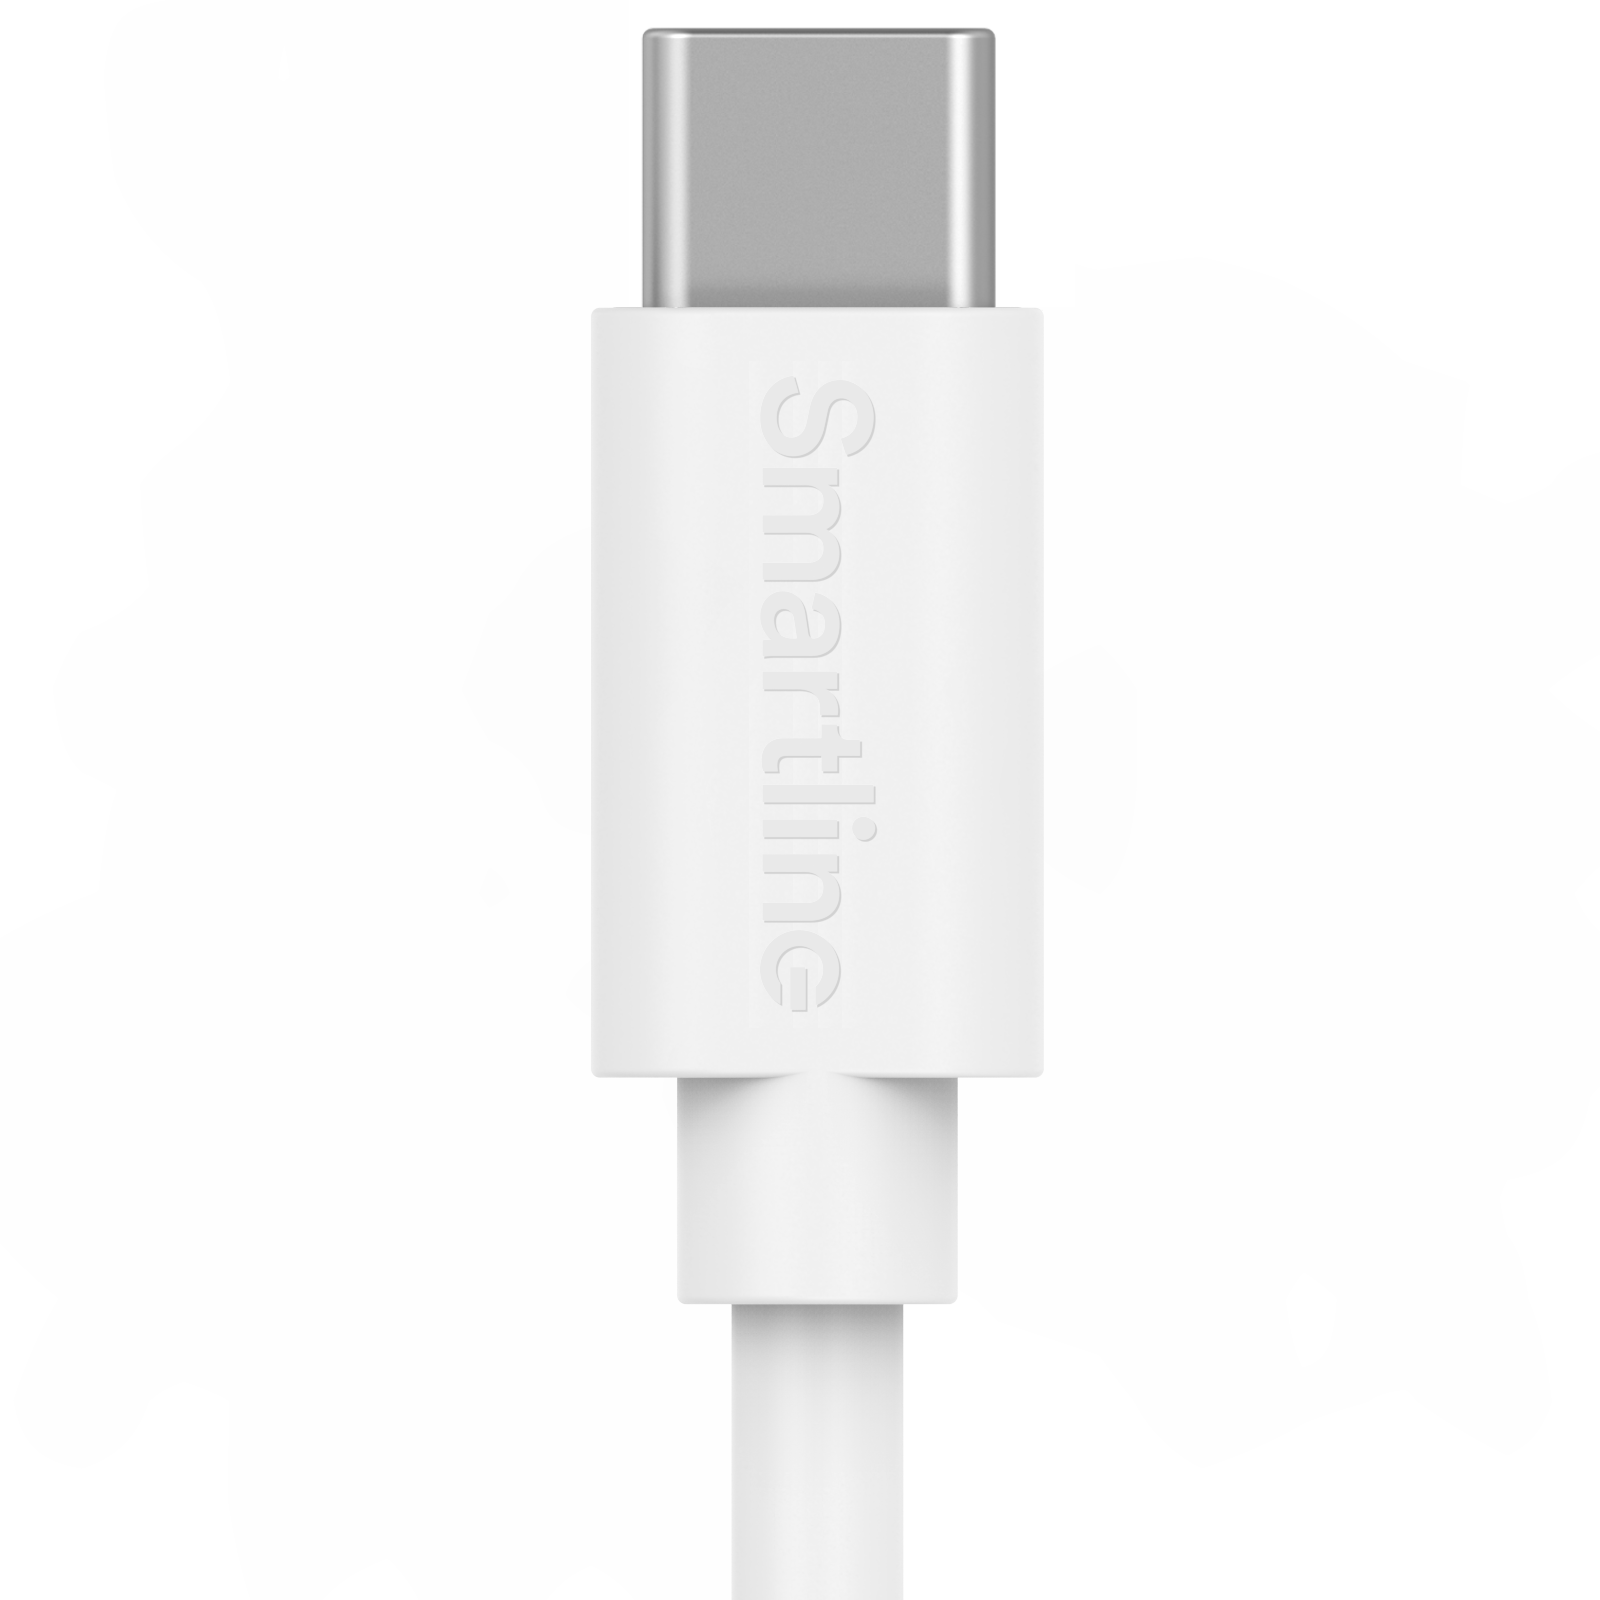 USB-A to Lightning Cable 1 meter White